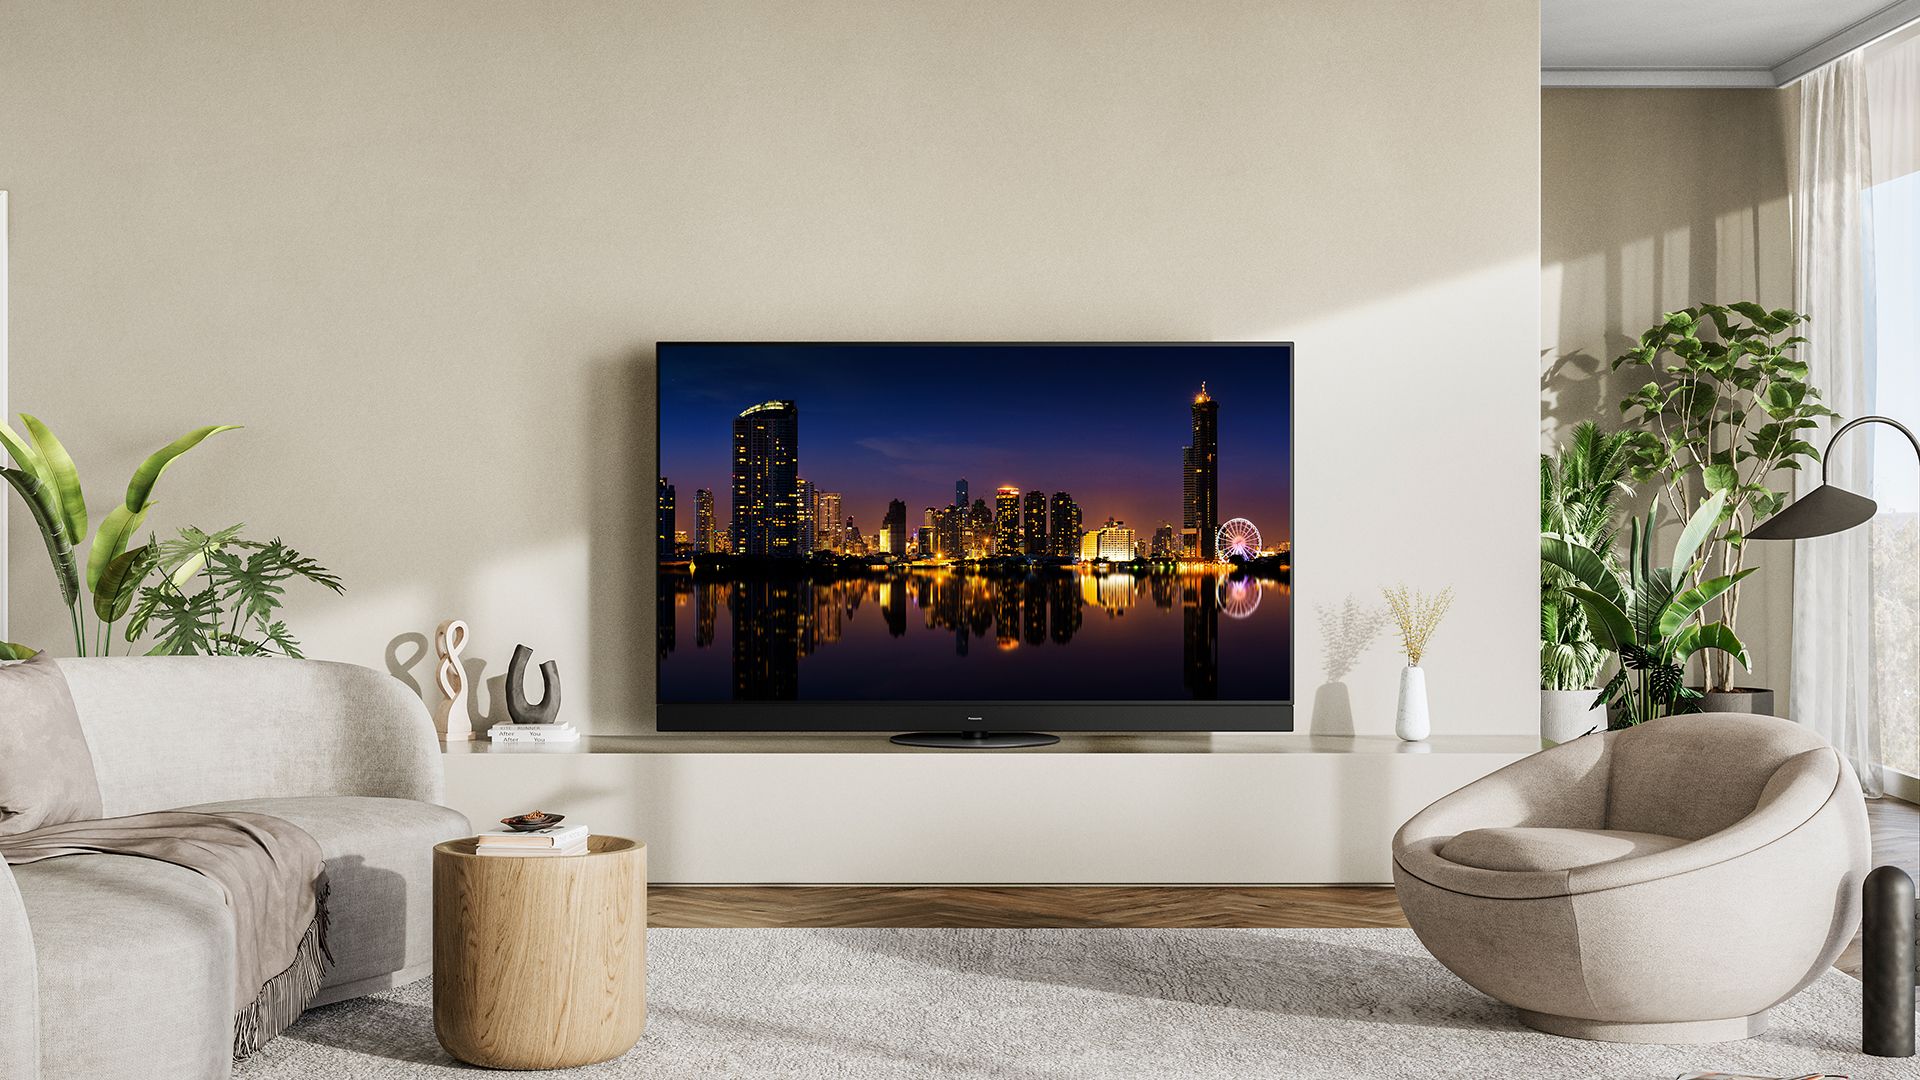 Panasonics 2023 Oled Tvs Are Finally Here And There Are Some Big Upgrades Techradar 2130